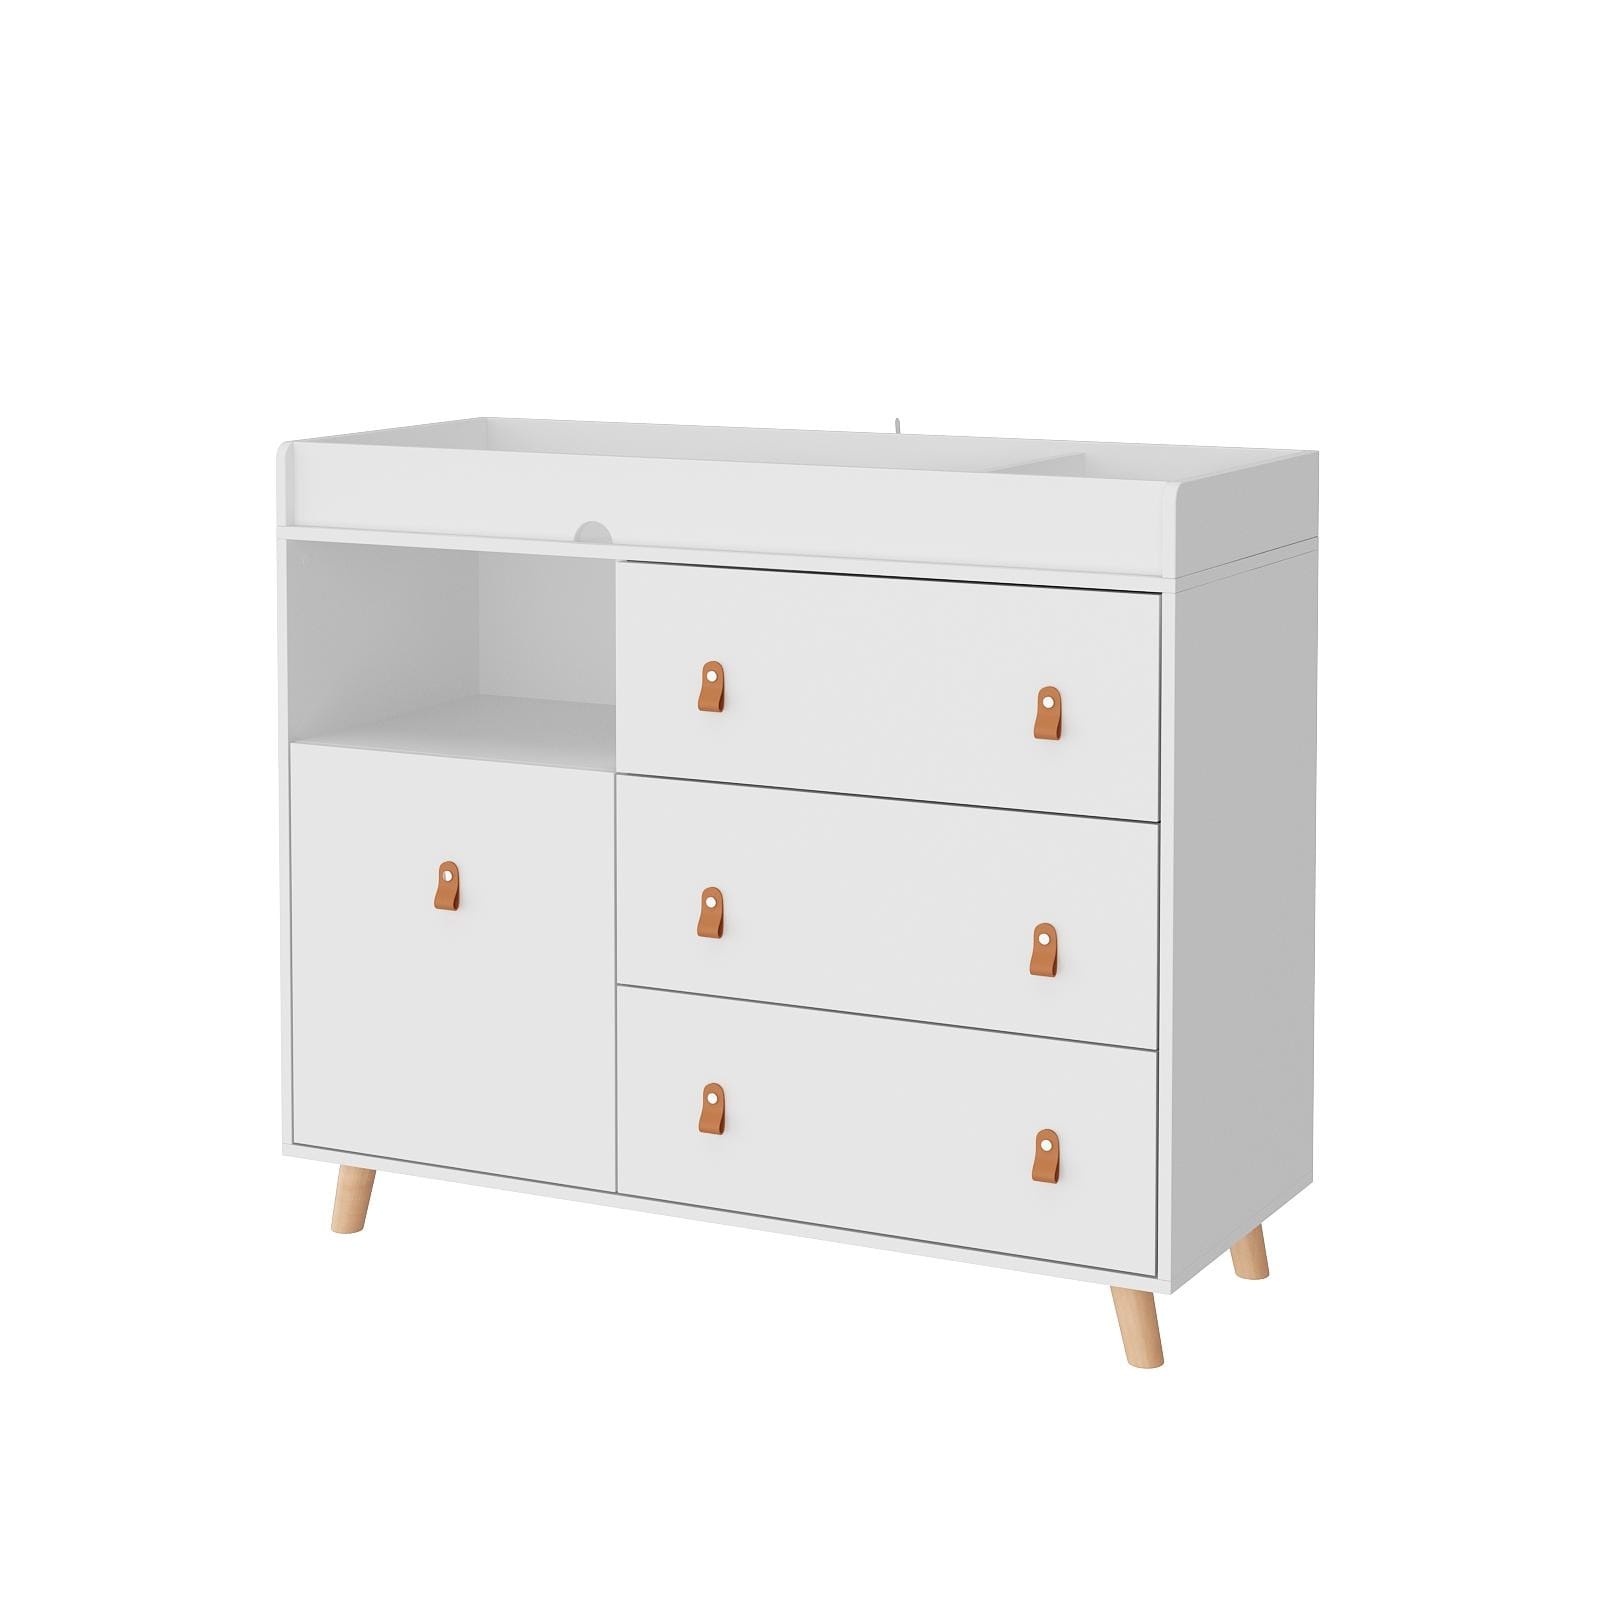 WAMPAT 34 Dresser for Bedroom with 3 Drawers, White Kids Dressers wit